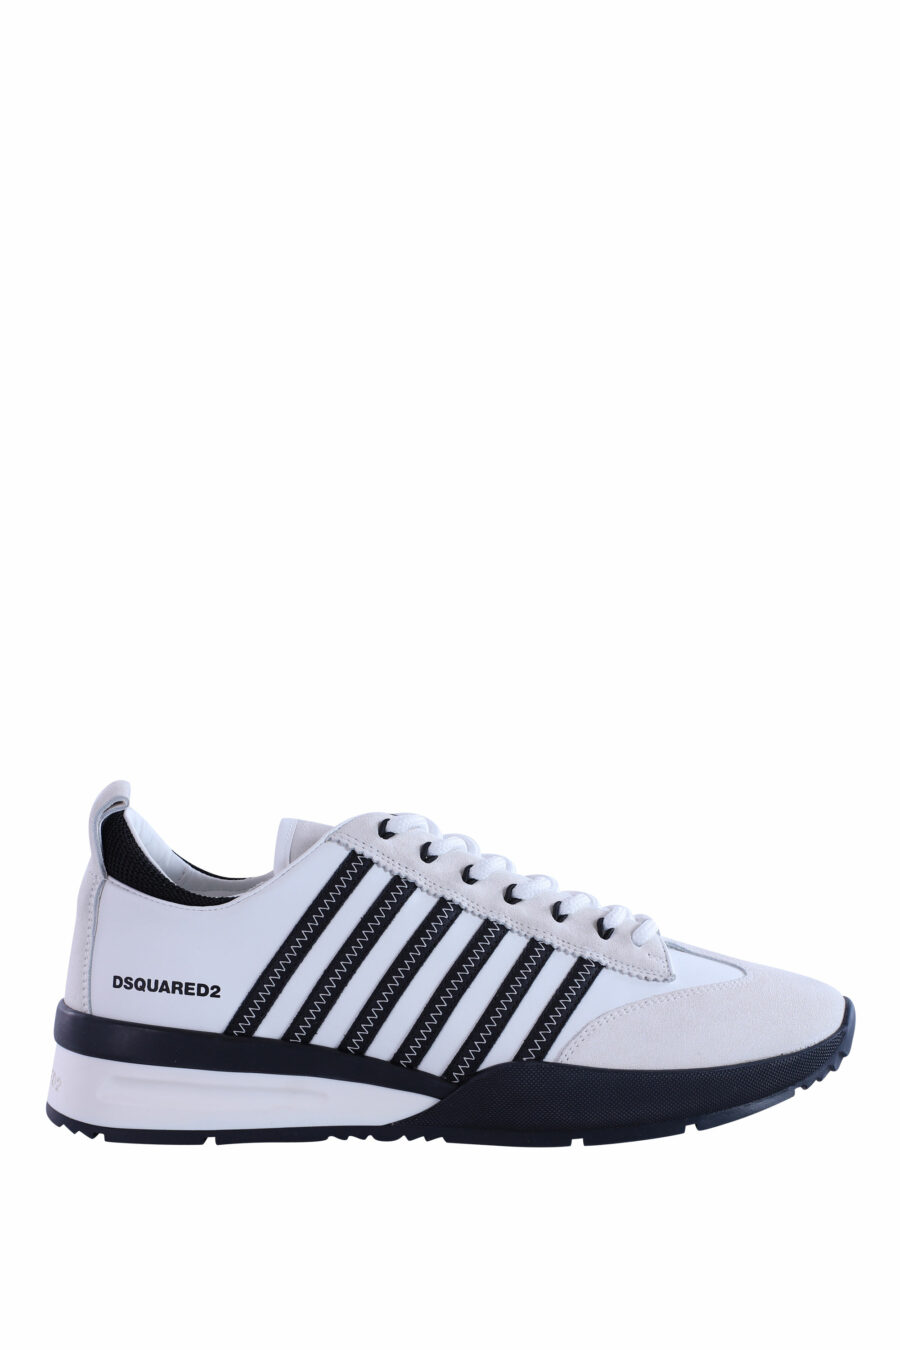 Black and white trainers with blue lines - IMG 2961